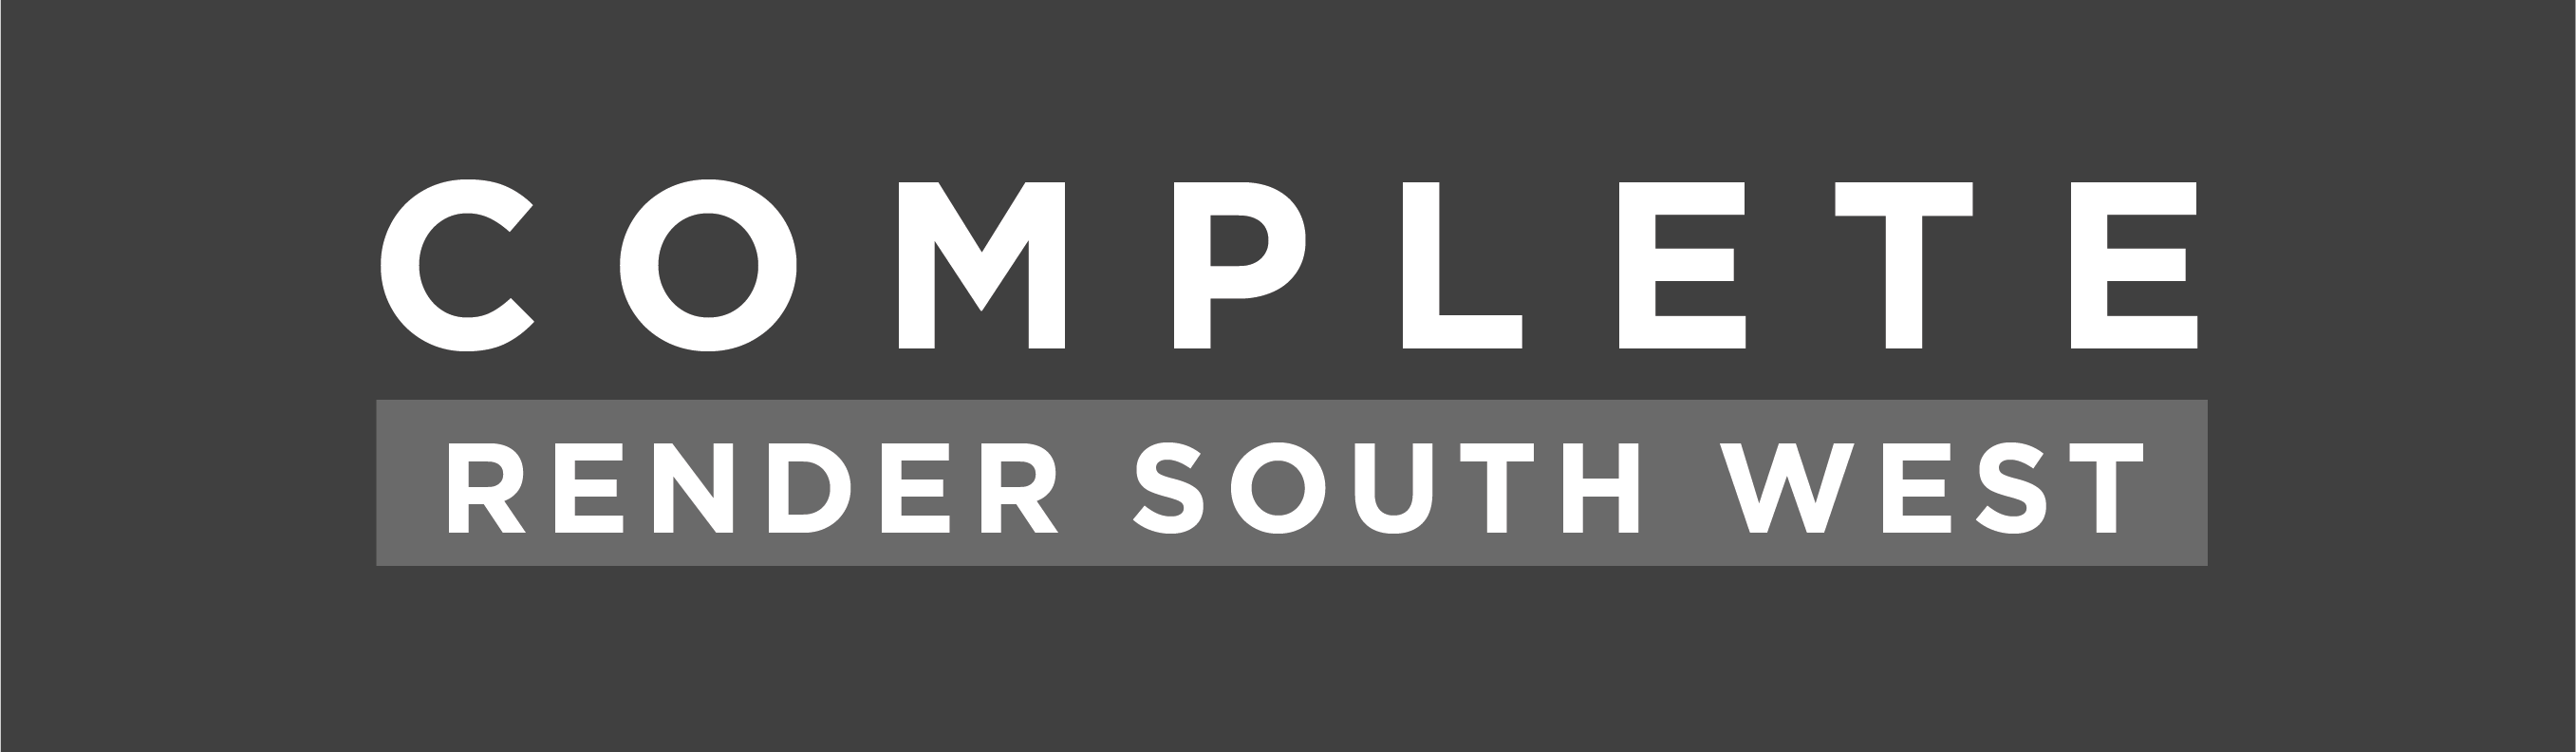 Compete Render South West